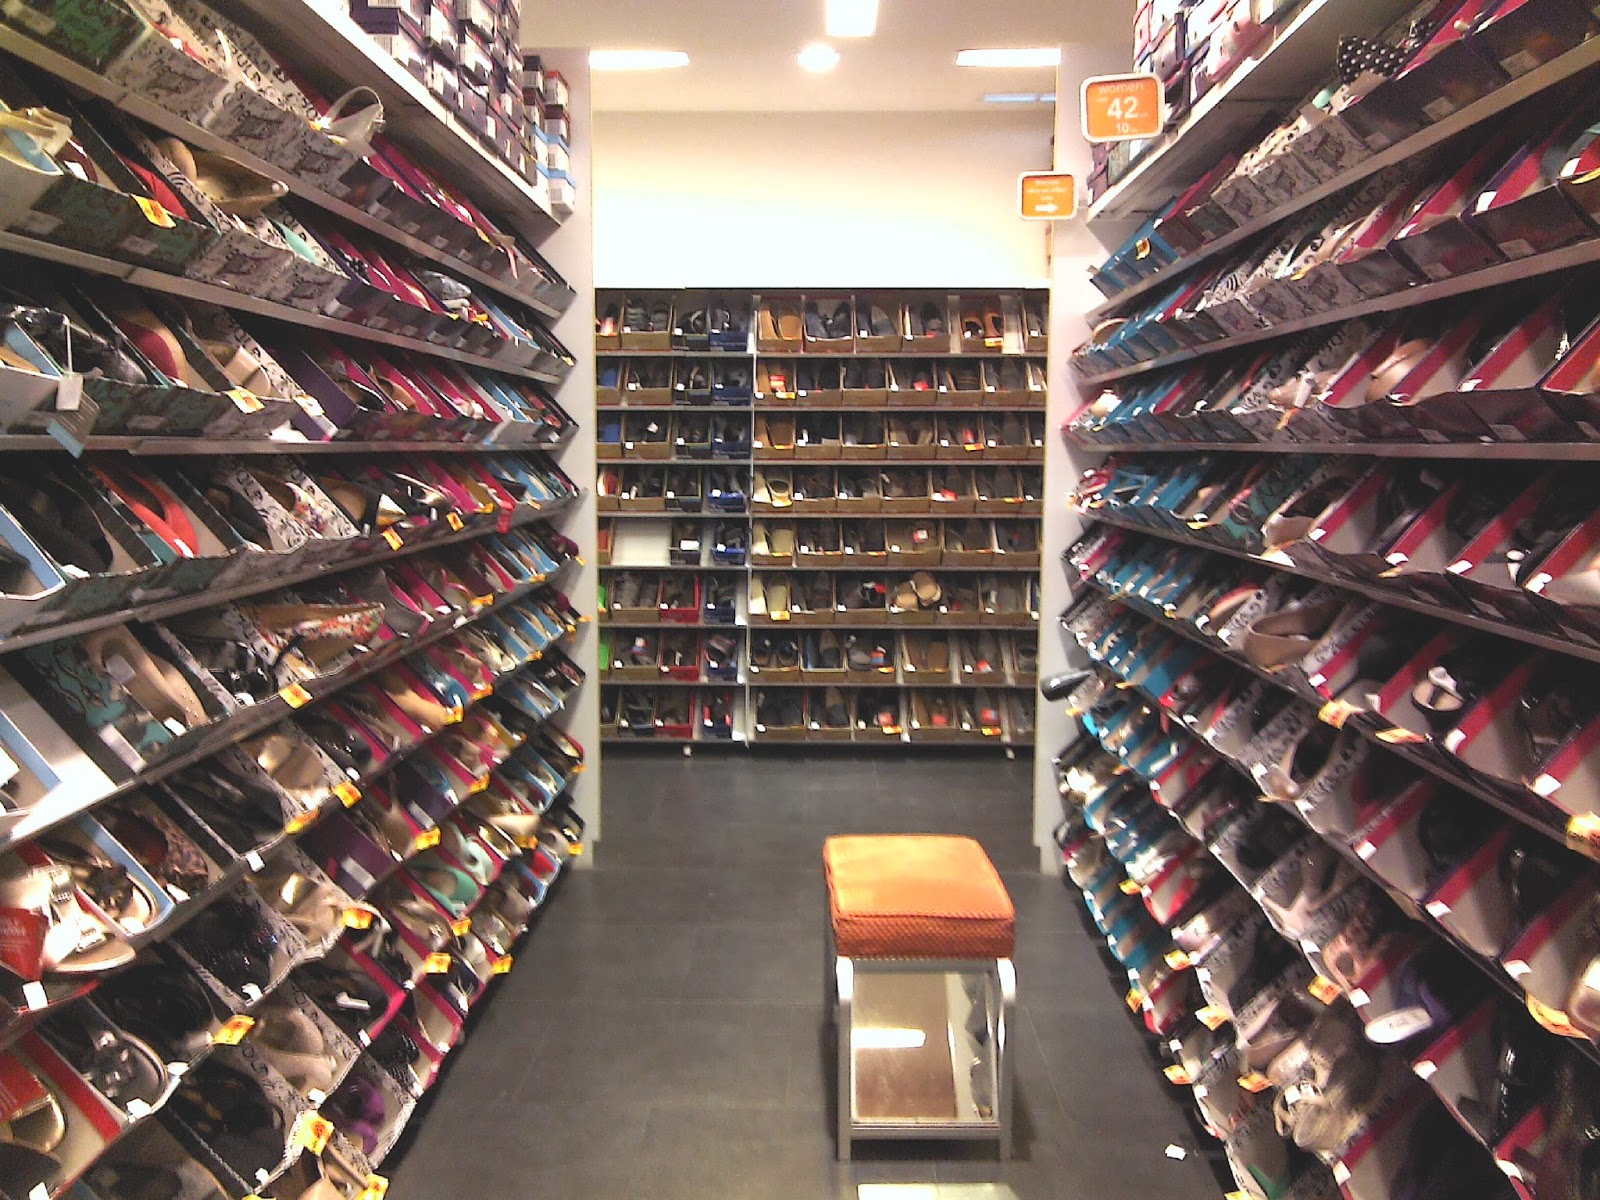 Food, Place  Hang out: Payless : A Shoe Warehouse